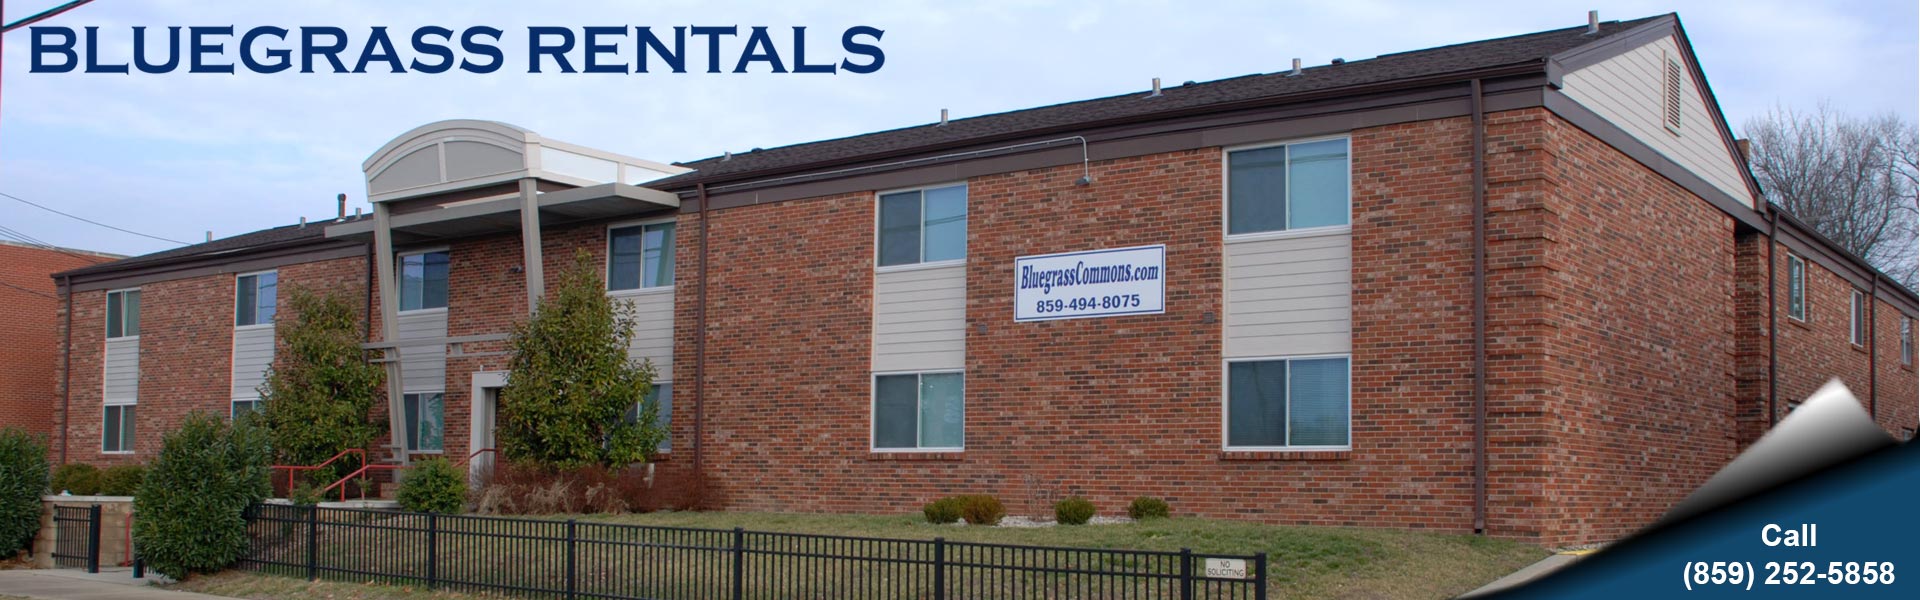 Bluegrass Rental Properties - University of Kentukcy Campus Housing and Single Family Homes - For Rent